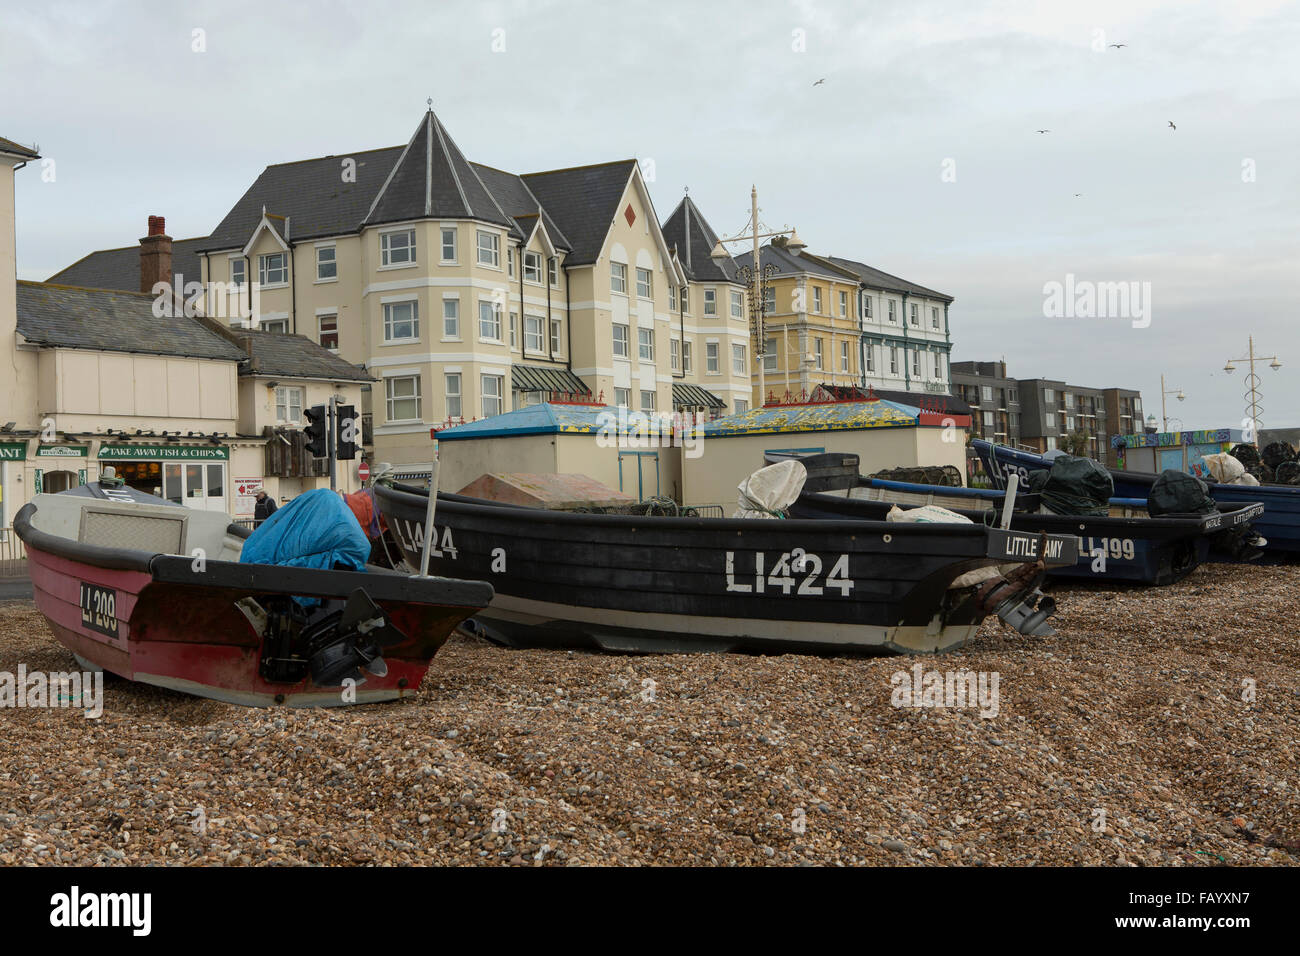 Fishing boats lined up on the beach at Bognor Regis. Seafront properties and hotels in the background. Stock Photo